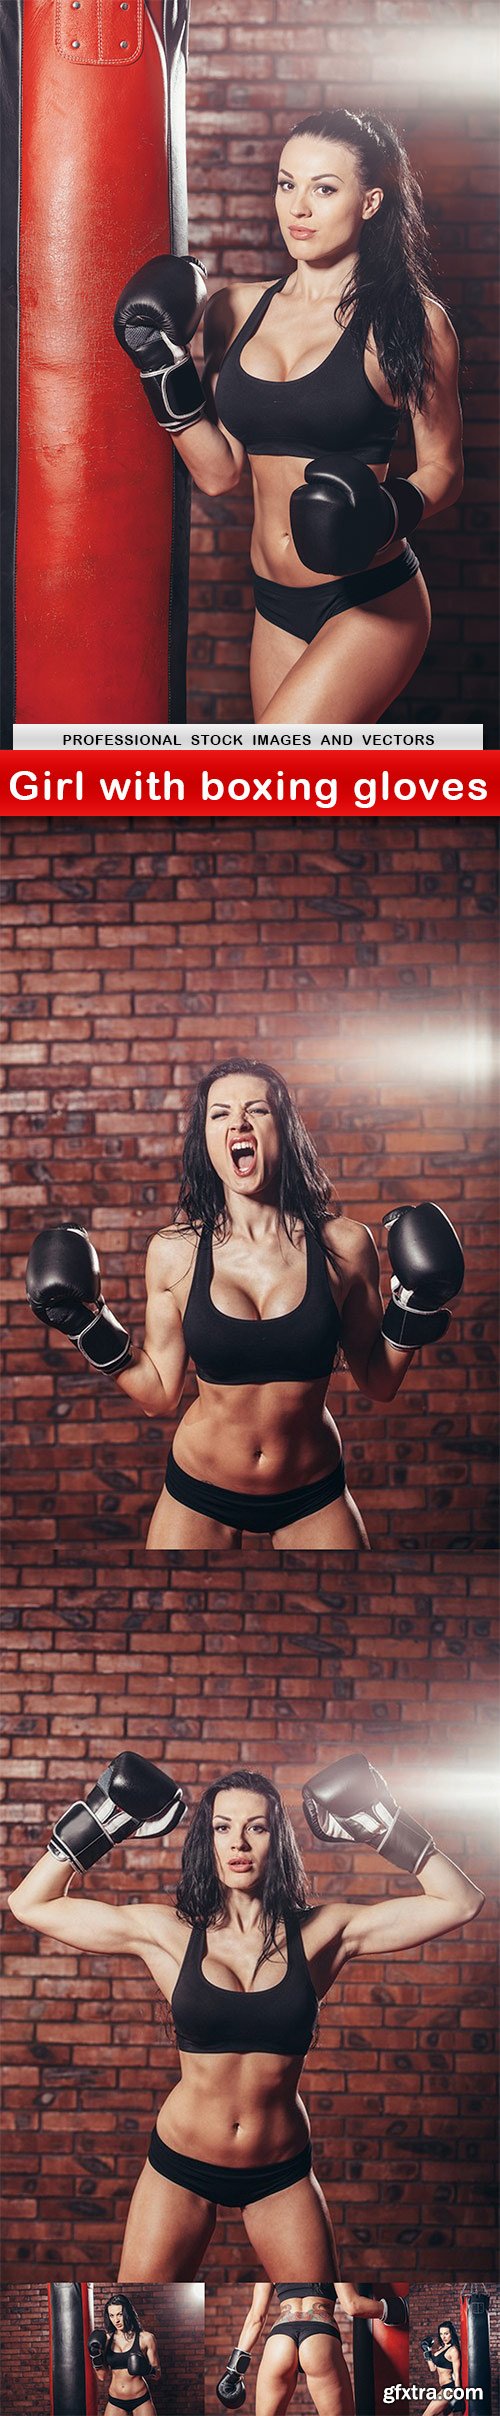 Girl with boxing gloves - 6 UHQ JPEG